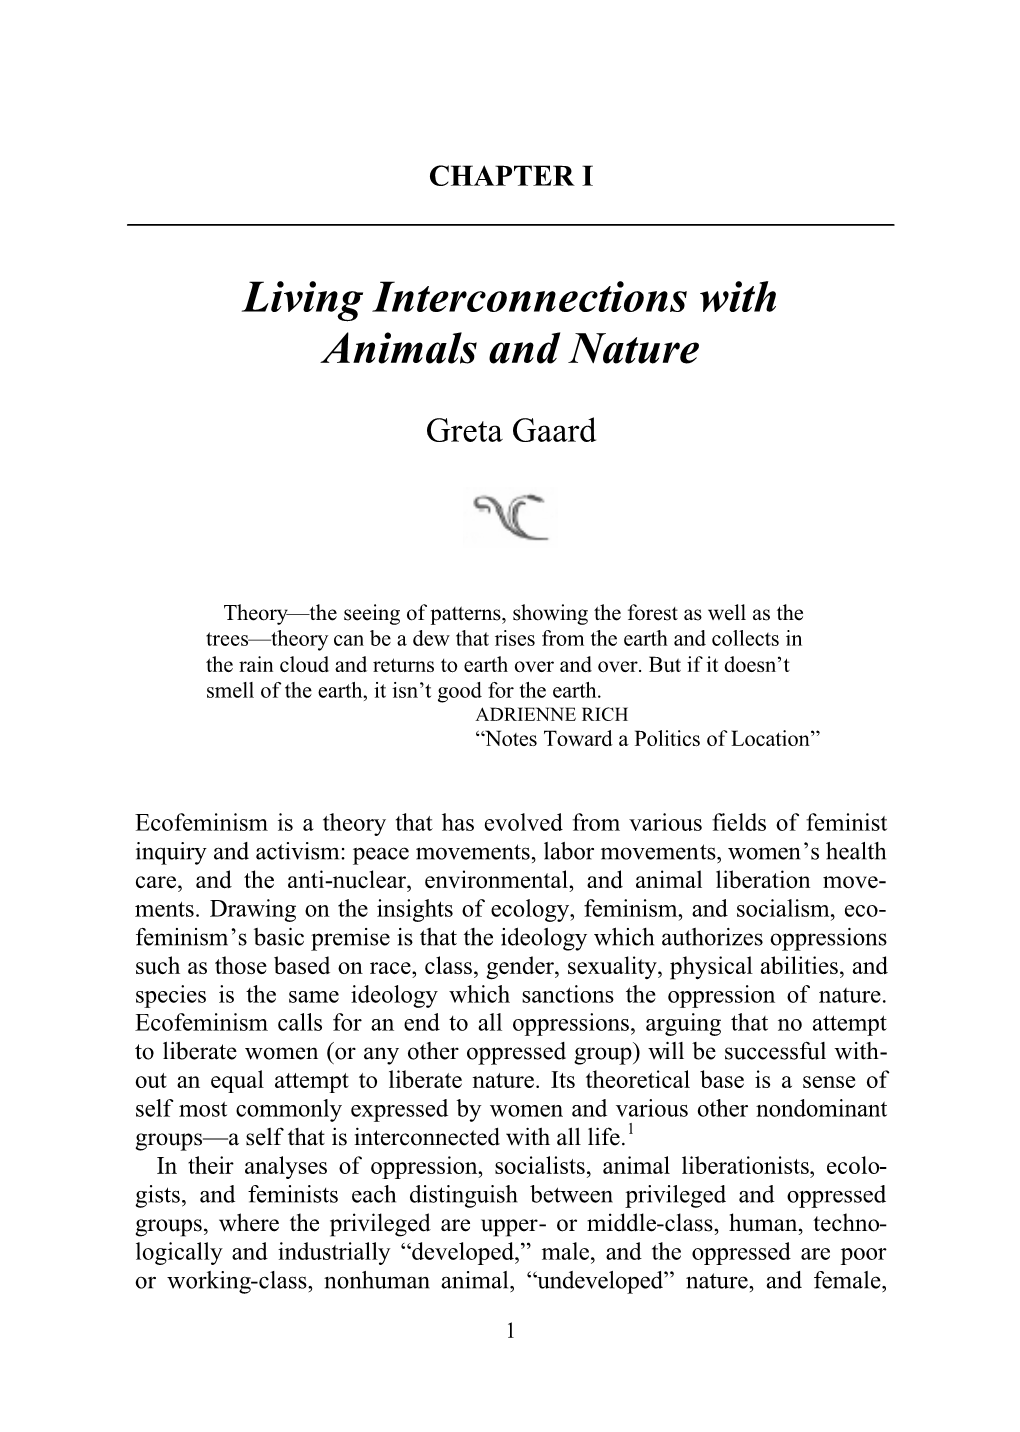 Living Interconnections with Animals and Nature